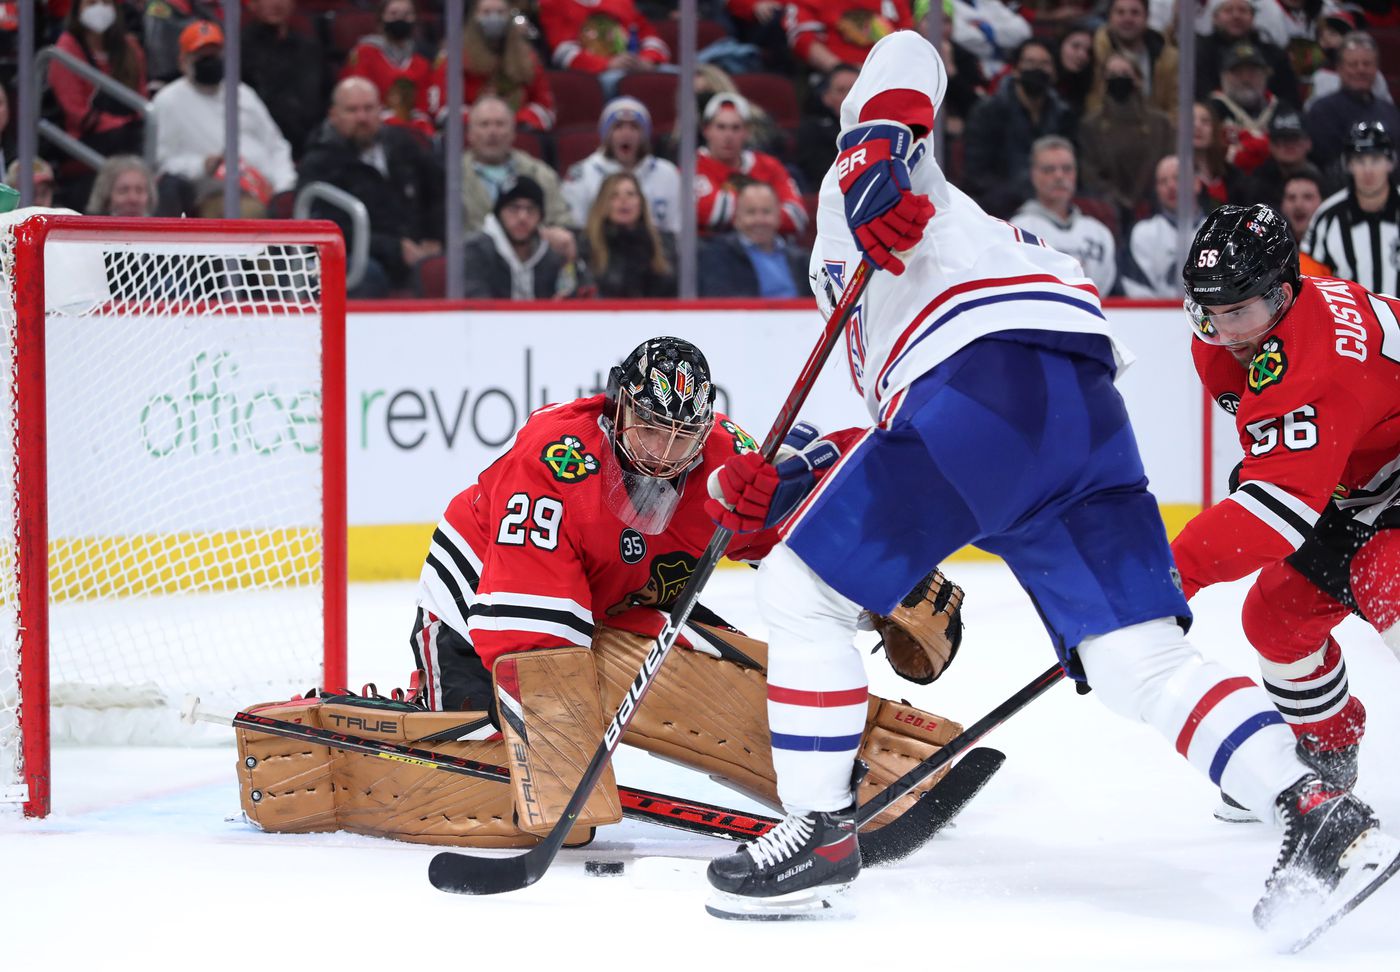 Chicago Blackhawks goaltender Marc-Andre Fleury (29) deflects a shot on goal by Montreal Canadiens center Nick Suzuki (14) in overtime at United Center on Jan. 13, 2022, in Chicago.